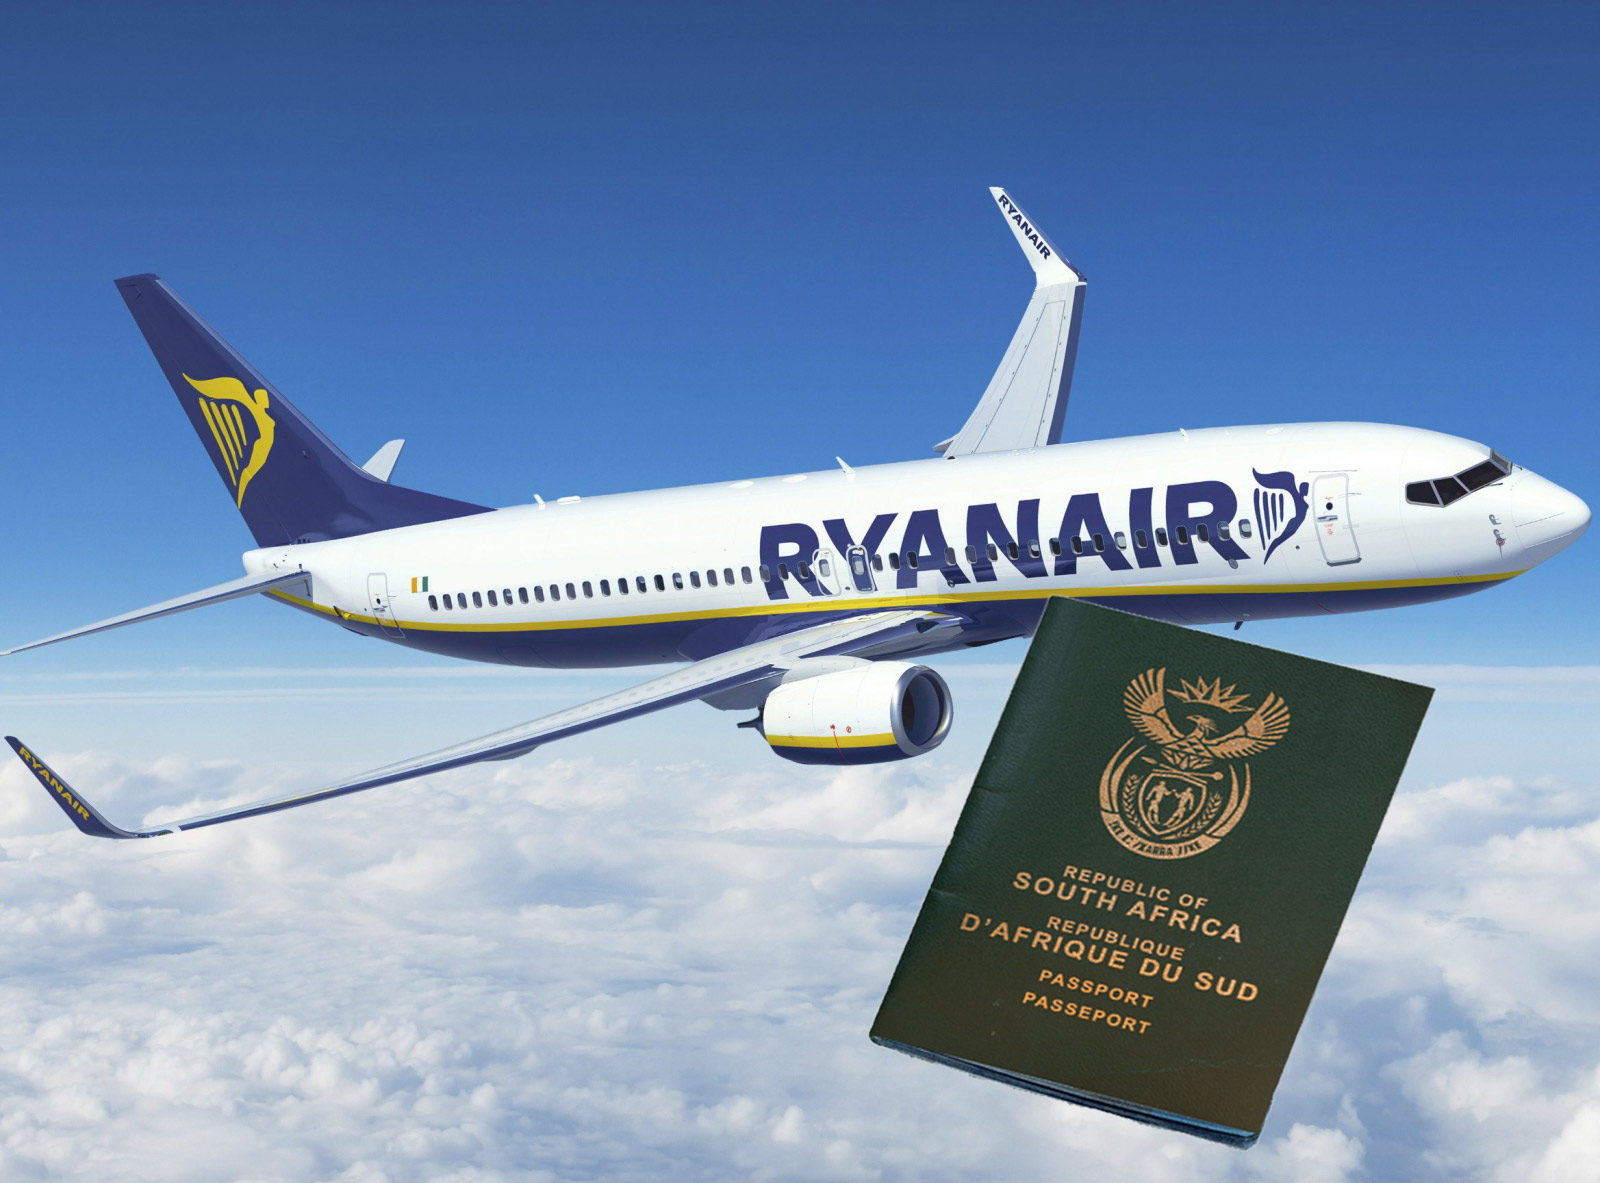 Crazy: Ryanair Forcing South African Passengers To Take Knowledge Test In  Afrikaans Or Be Denied Boarding - Live and Let's Fly